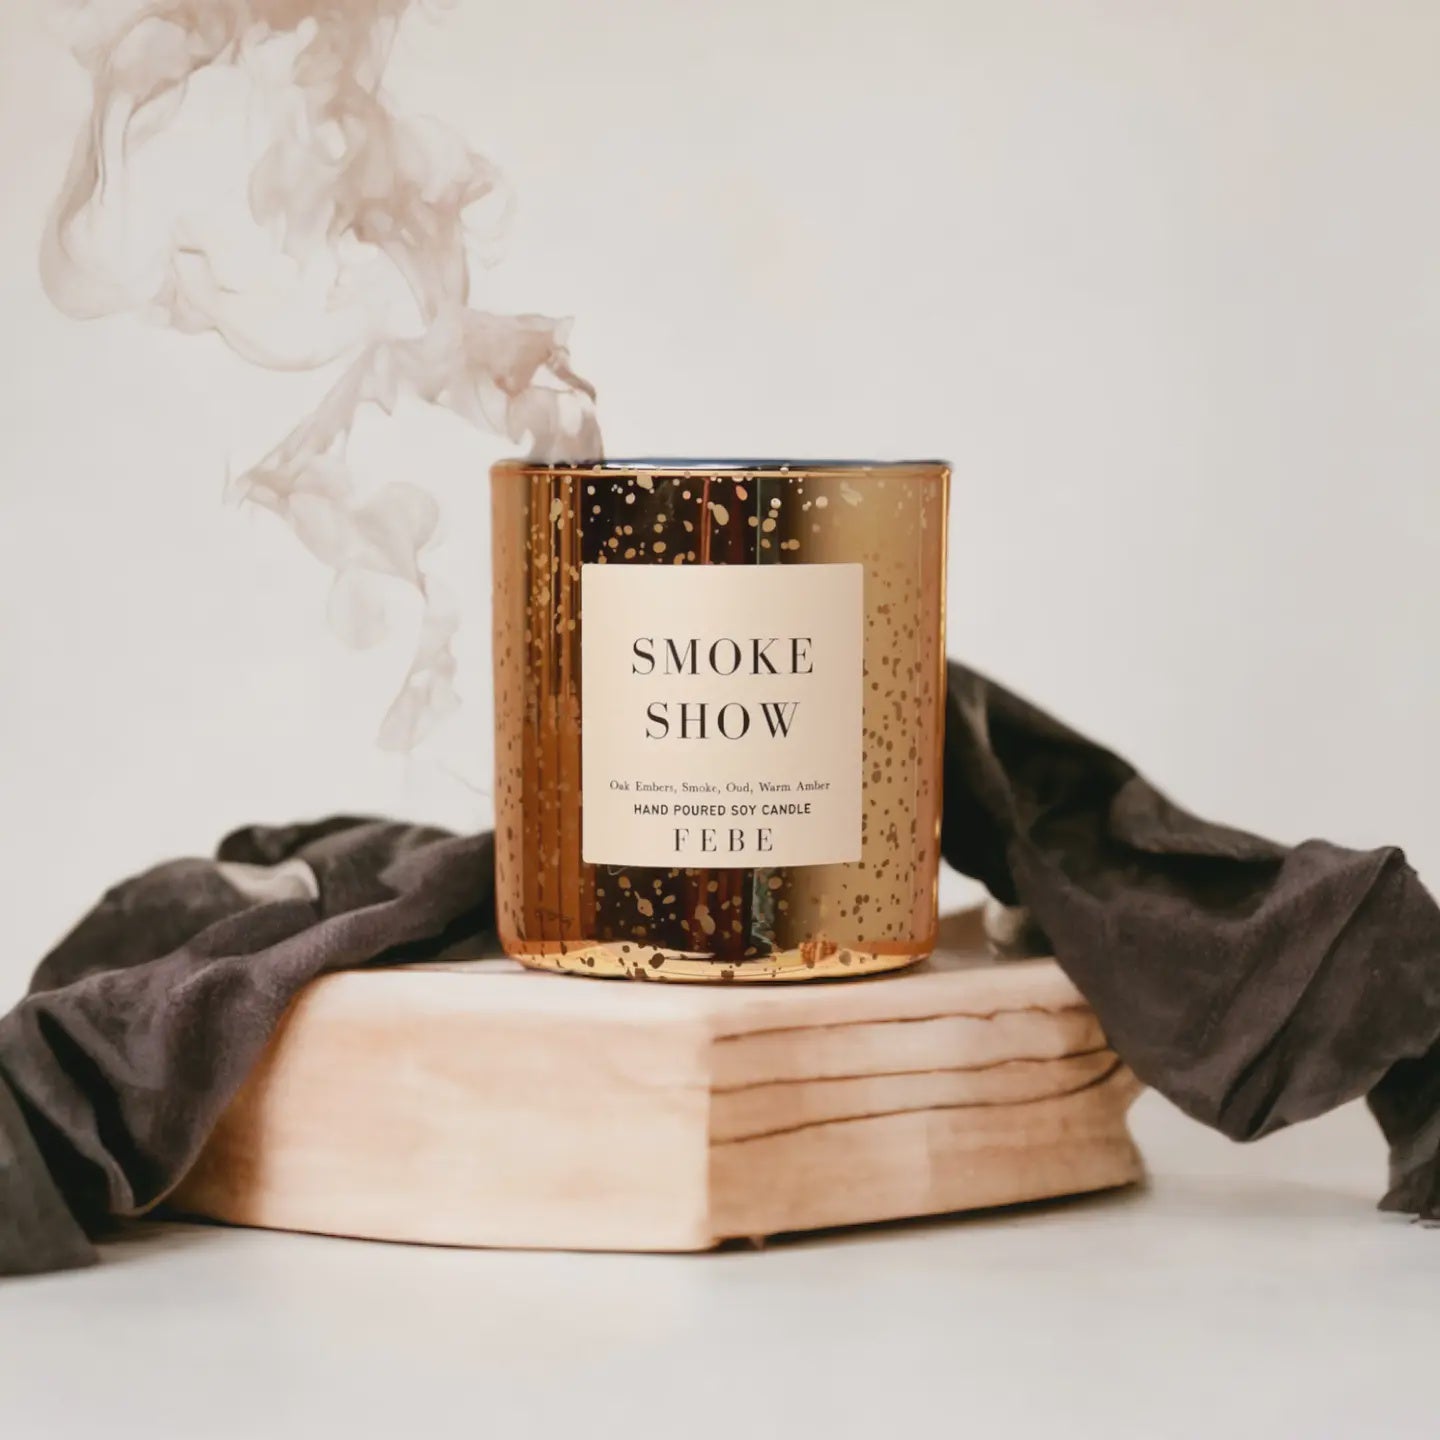 A Faire scented candle labeled &quot;Smoke Show&quot; on a book, surrounded by a gray scarf styled like an Arizona bungalow, with wisps of smoke rising from the FEBE candle, set against a soft off-white background.